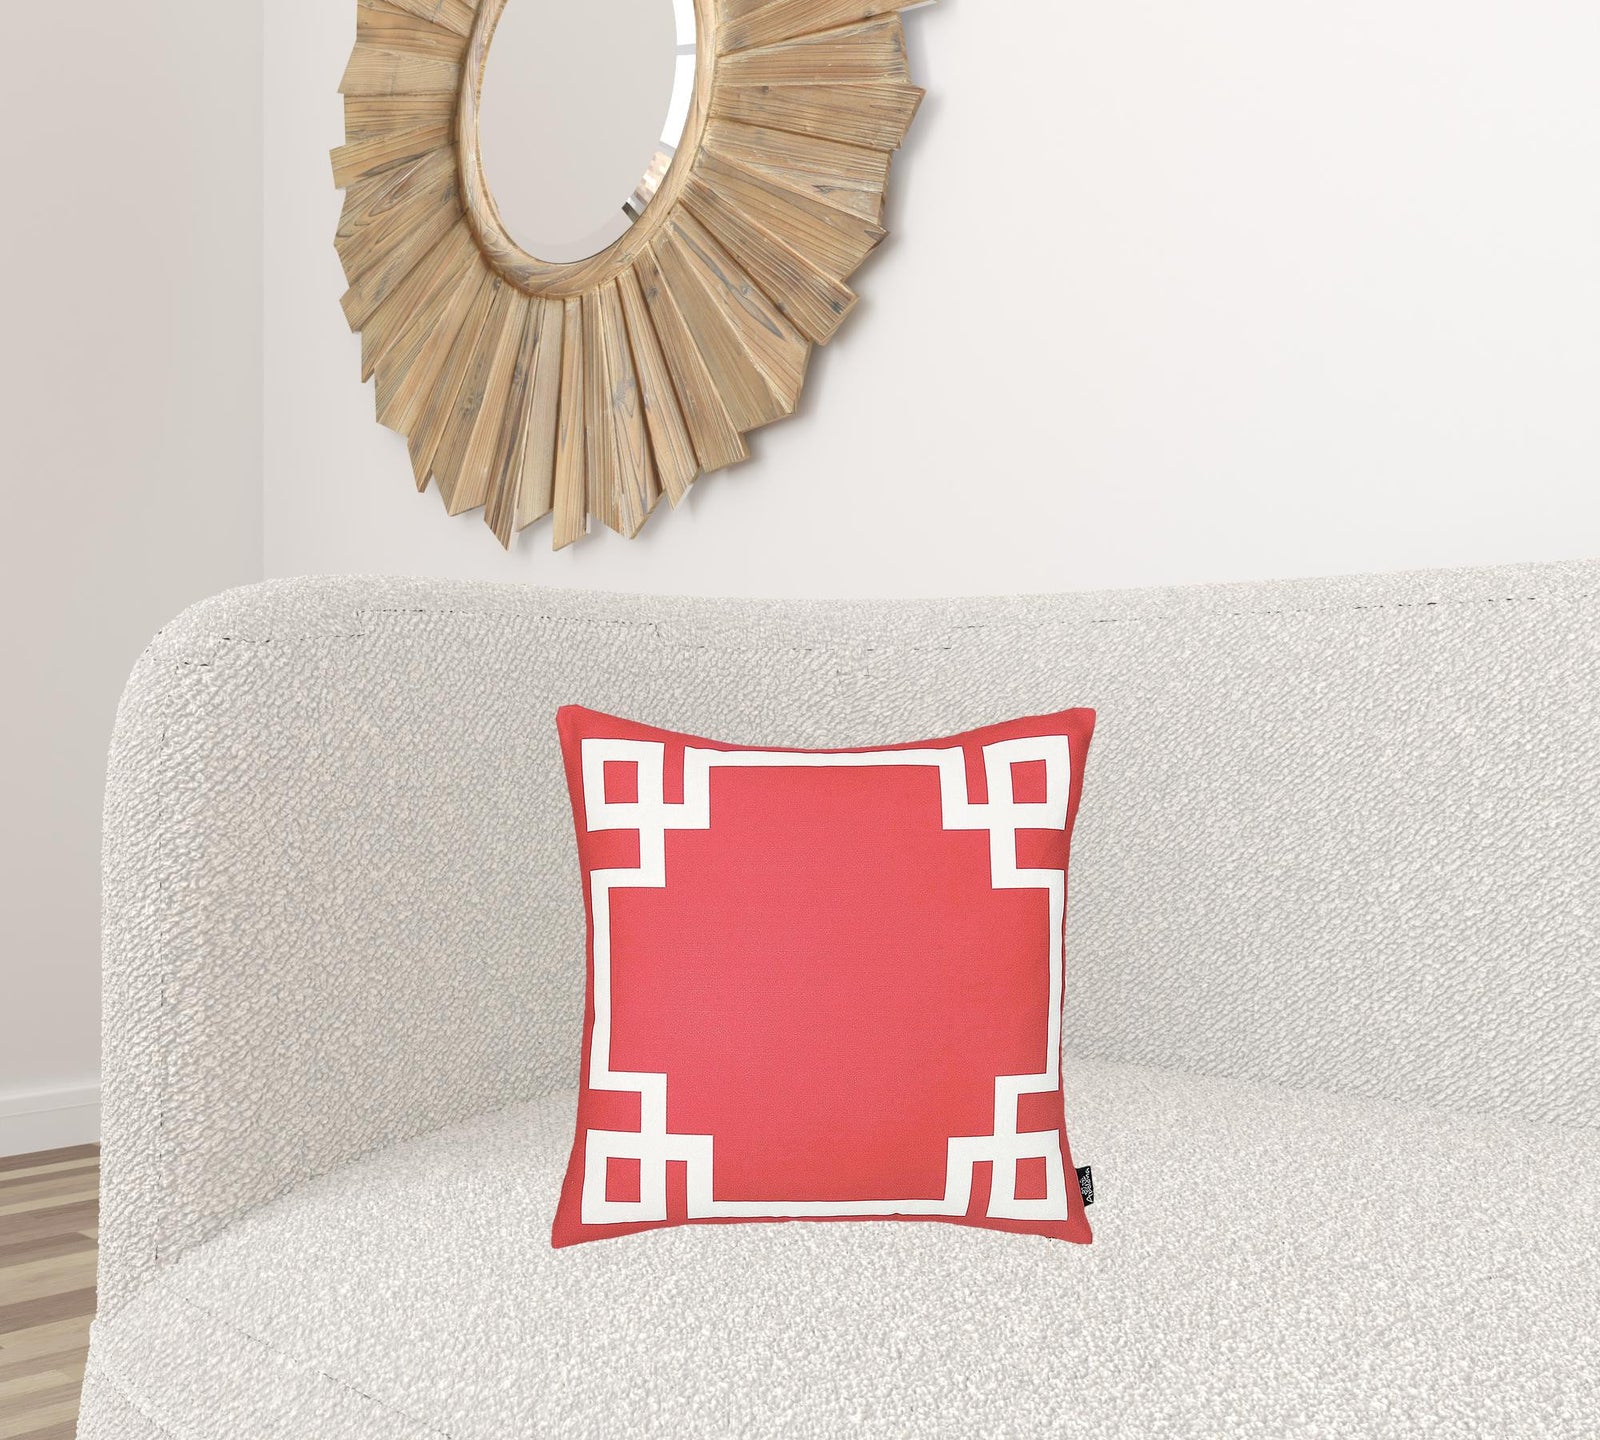 Square Red And White Geometric Decorative Throw Pillow Cover